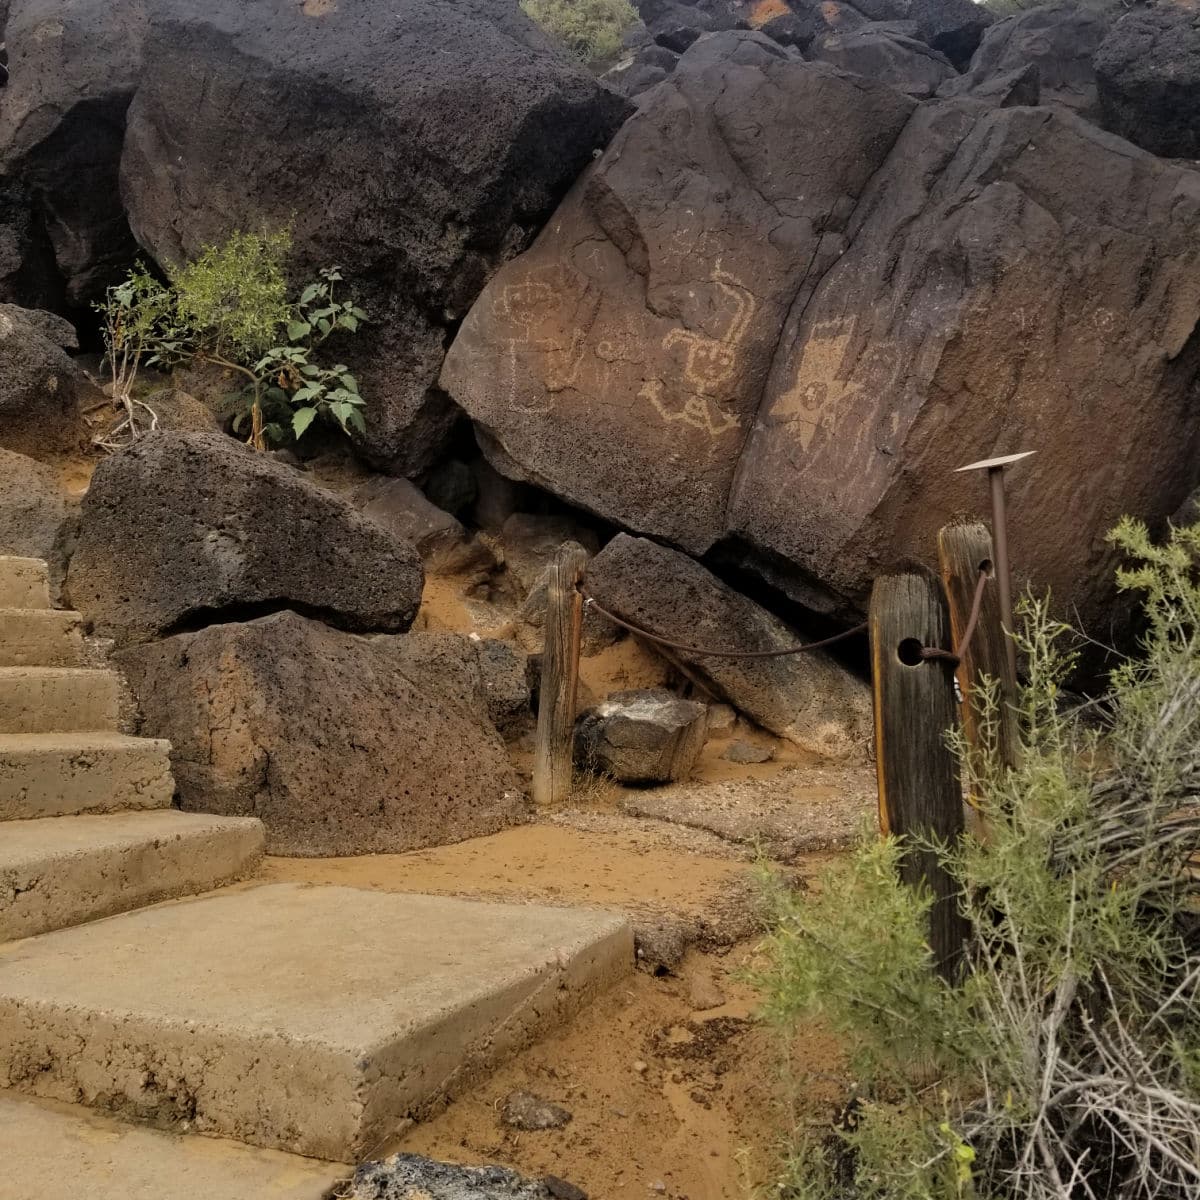 Several petroglyphs along the Cliff Base Trail in Boca Negra Canyon at Petroglyph National Monument